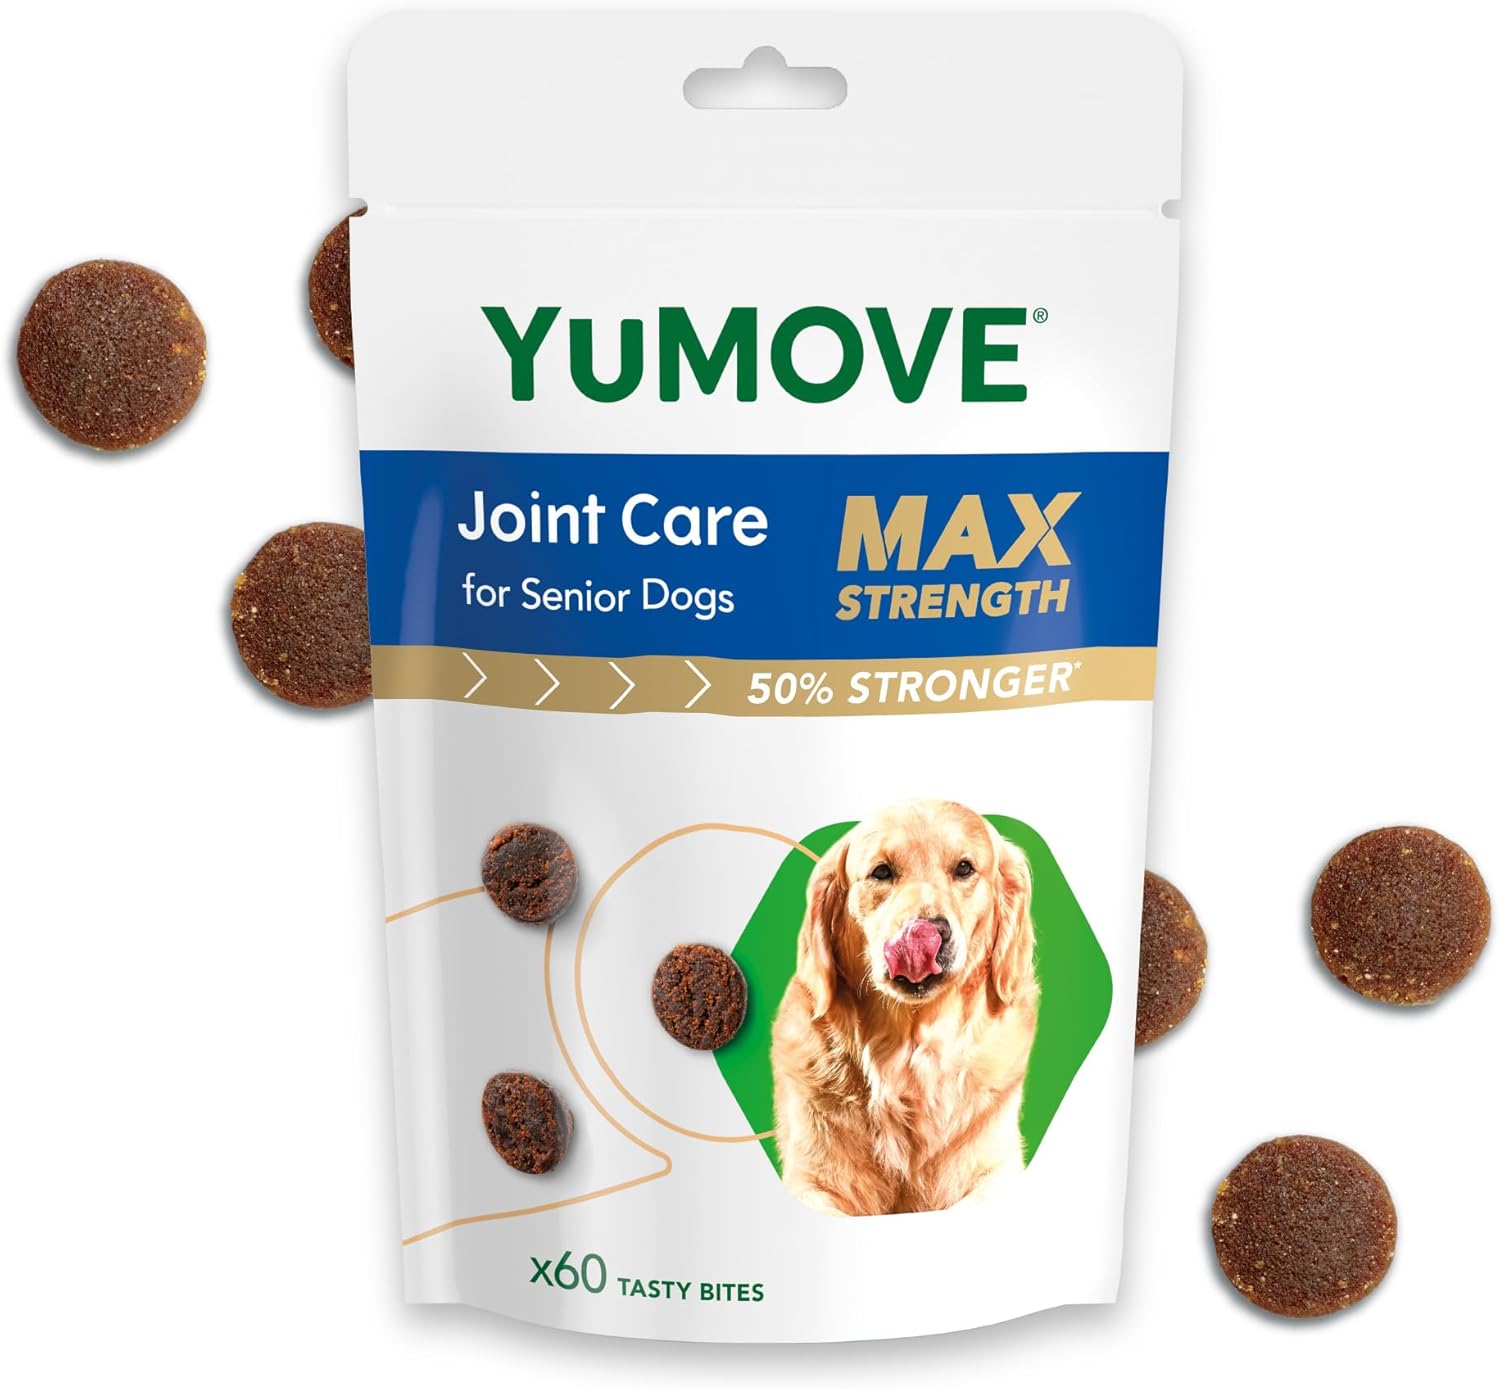 YuMOVE Senior Max Strength Tasty Bites | Maximum Strength Joint Supplement for Older, Stiff Dogs with Glucosamine, Chondroitin, Green Lipped Mussel | Aged 9+ | 60 Chews?YMSMB60